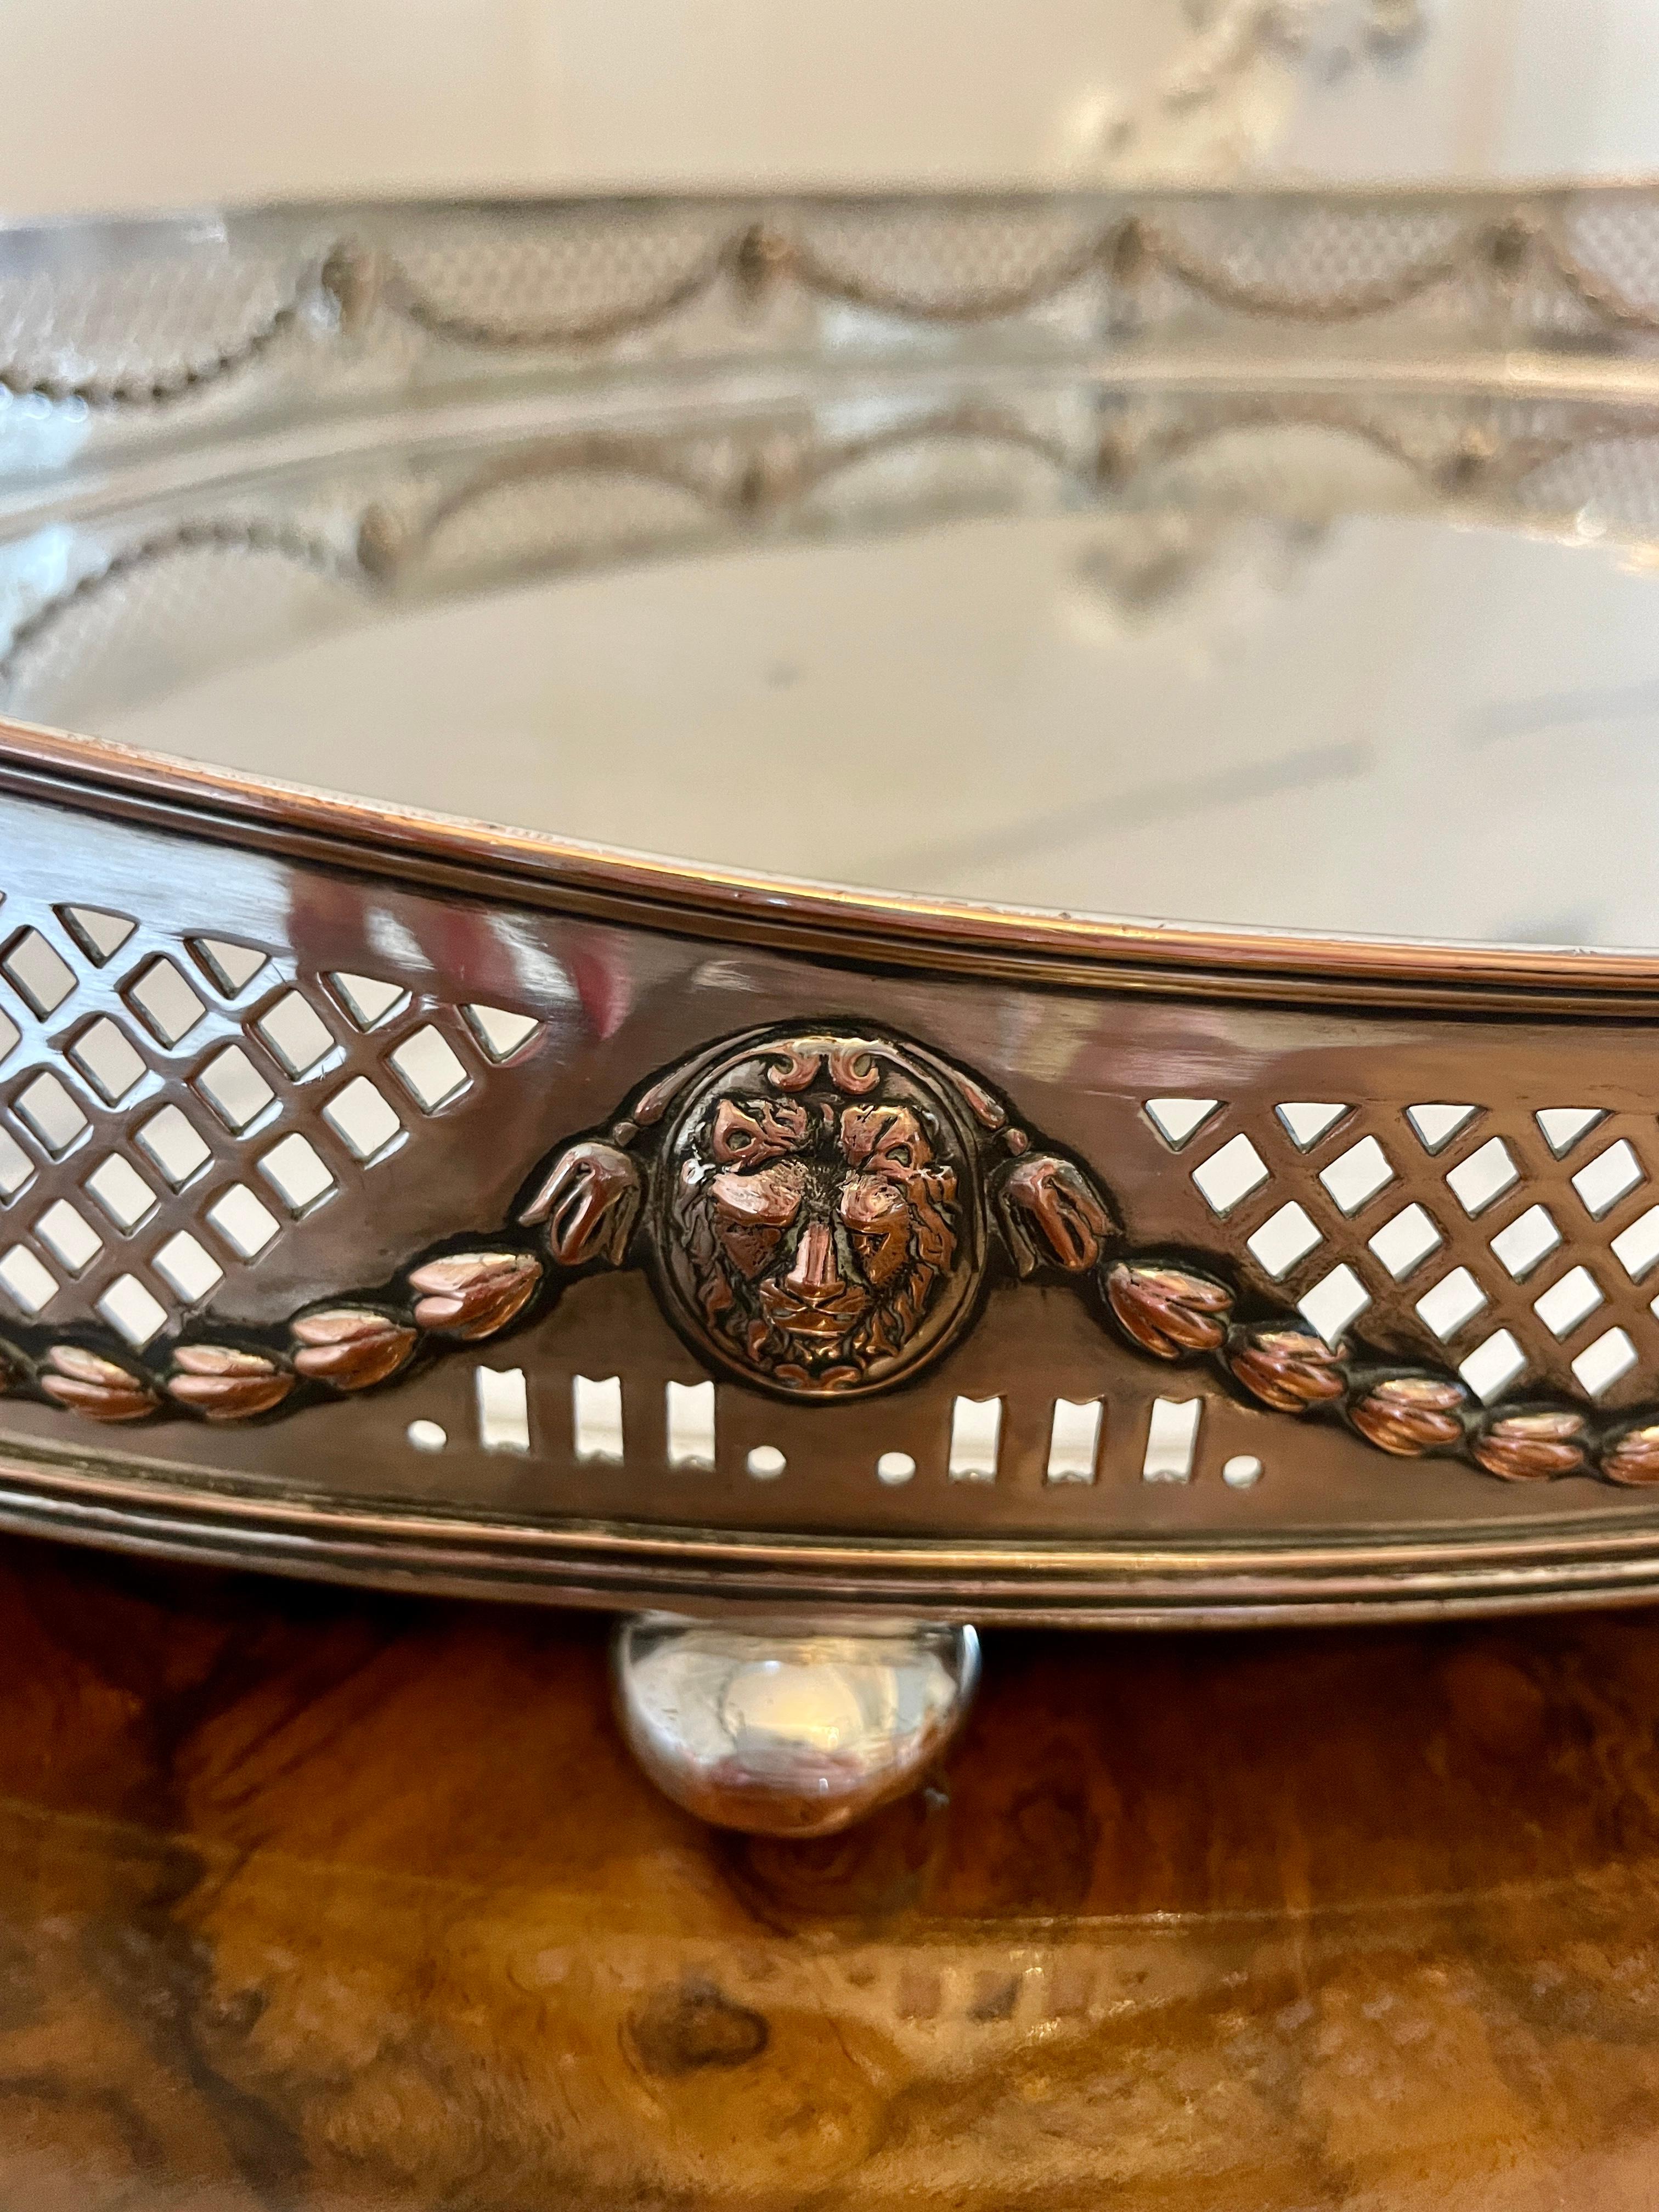  Large Antique Edwardian Quality Silver Plated Oval Shaped Tea Tray  In Good Condition For Sale In Suffolk, GB